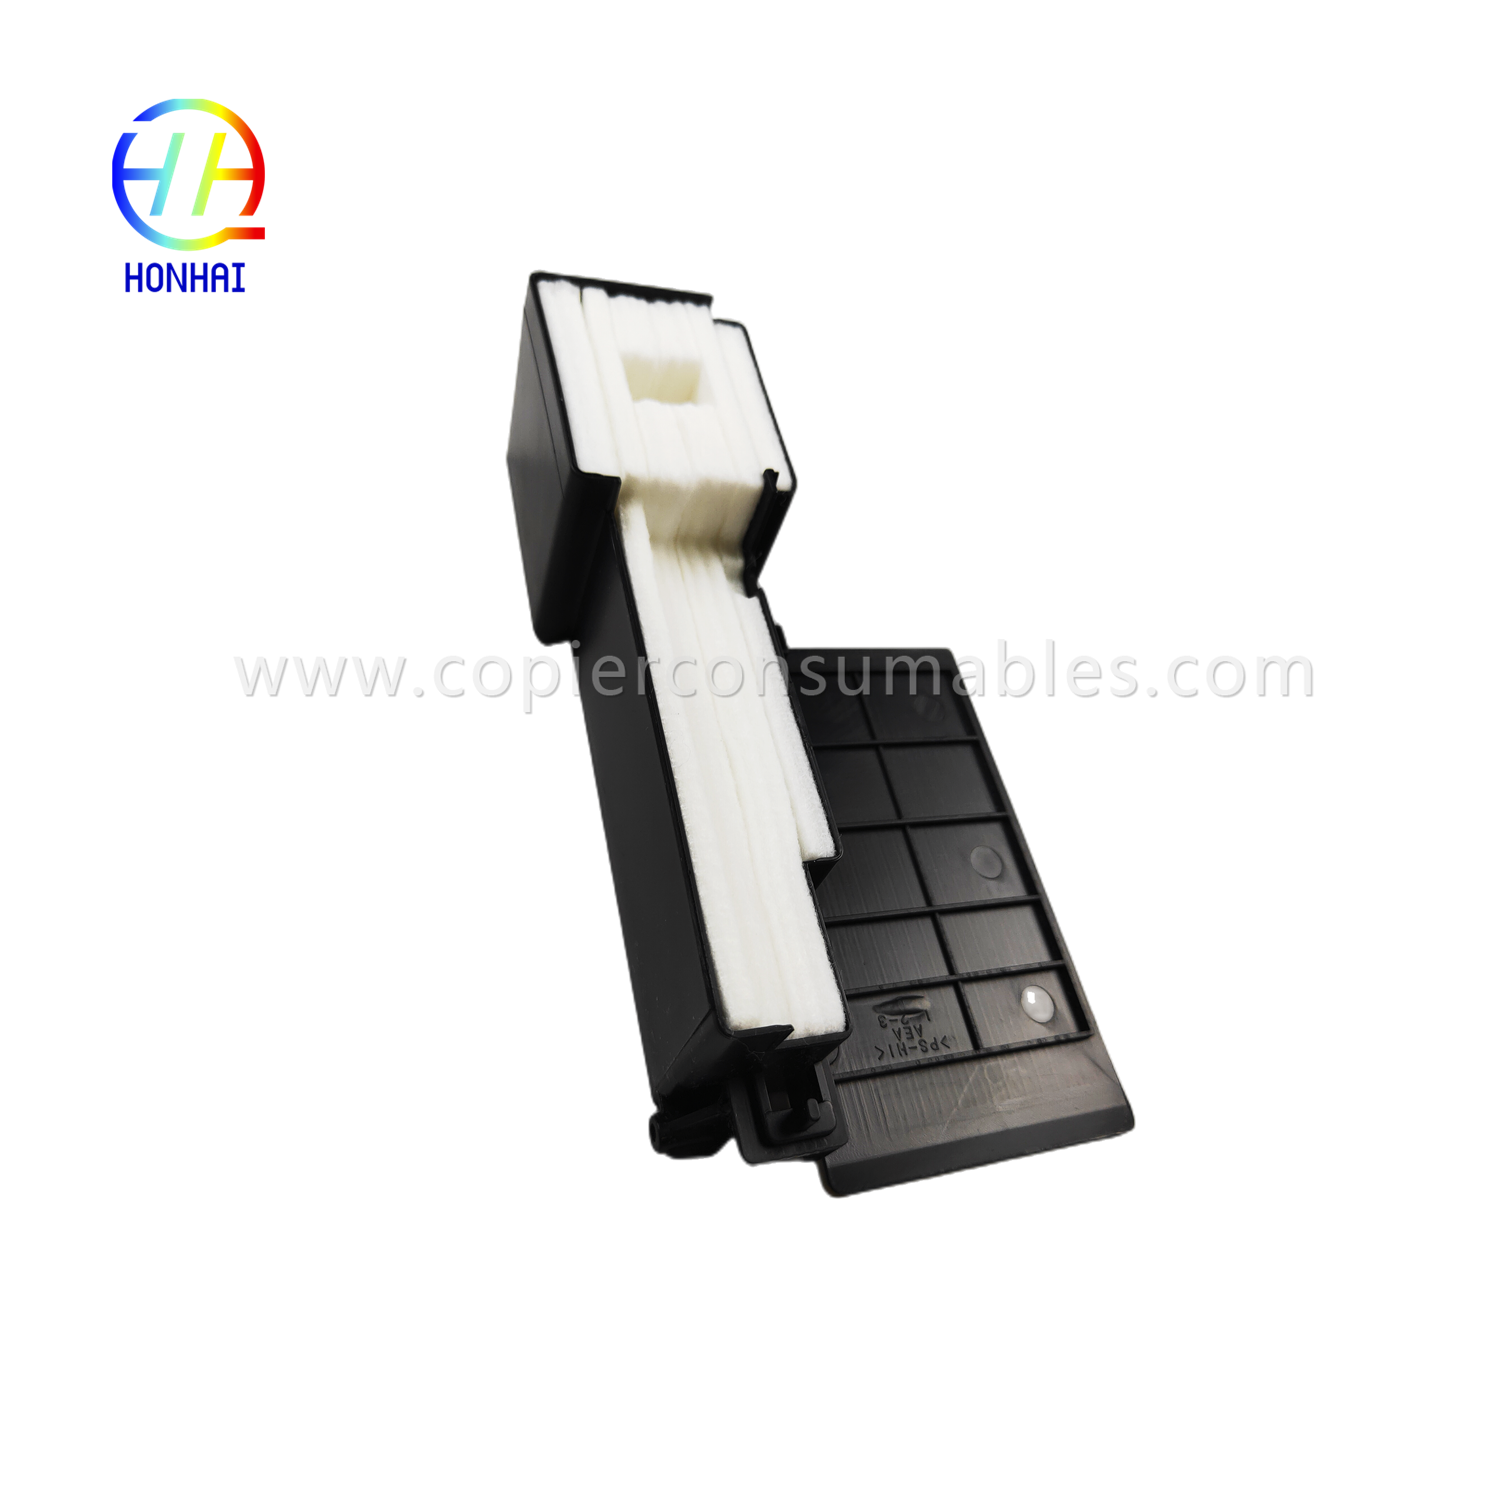 https://www.copierconsumables.com/waste-ink-pad-pack-forl220-l360-l380-printer-product/